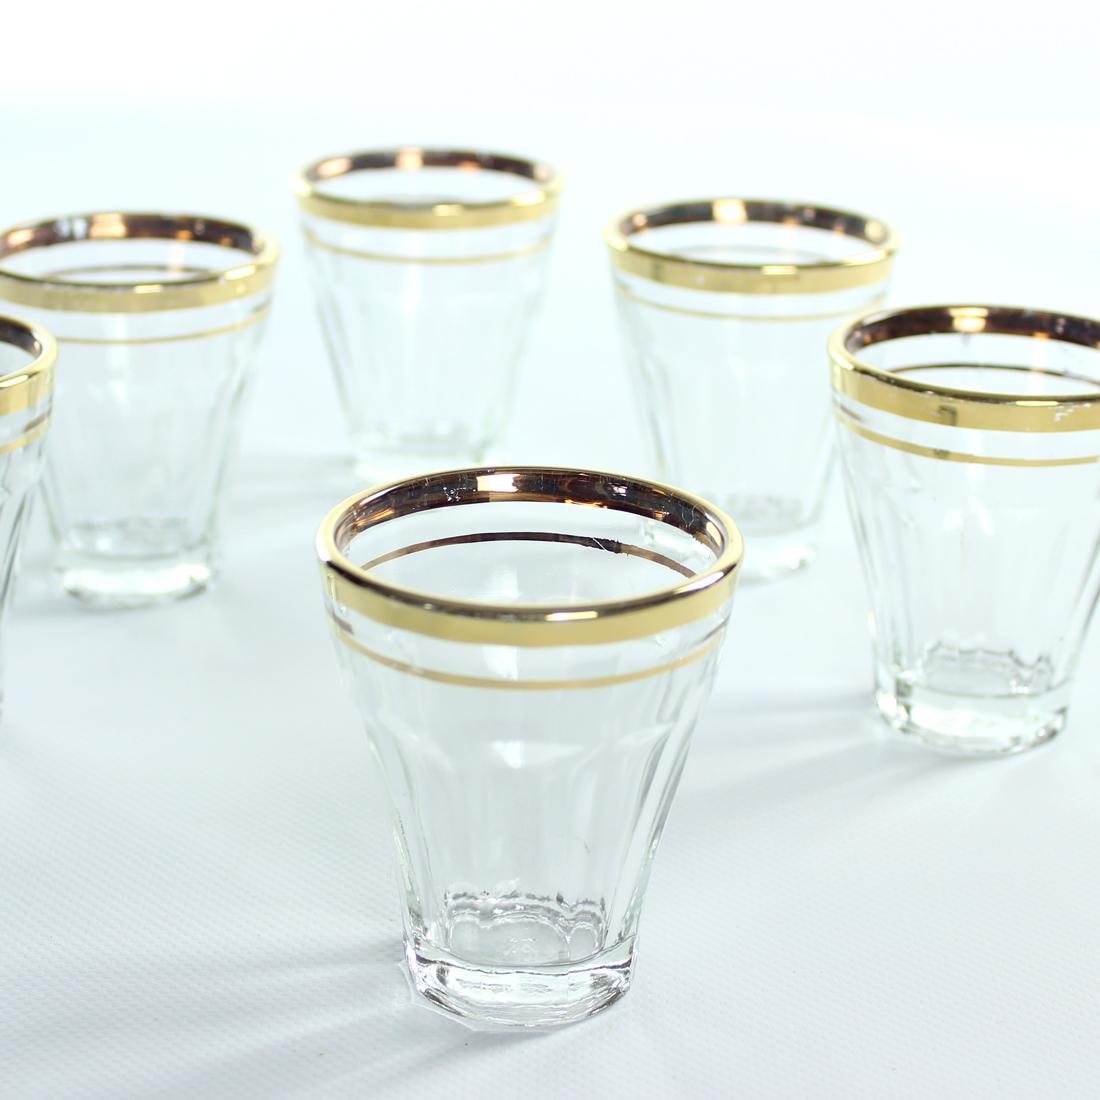 Mid-Century Modern Vintage Drinking Glasses With Gold Rim, Set Of 6, Czechoslovakia 1960s For Sale